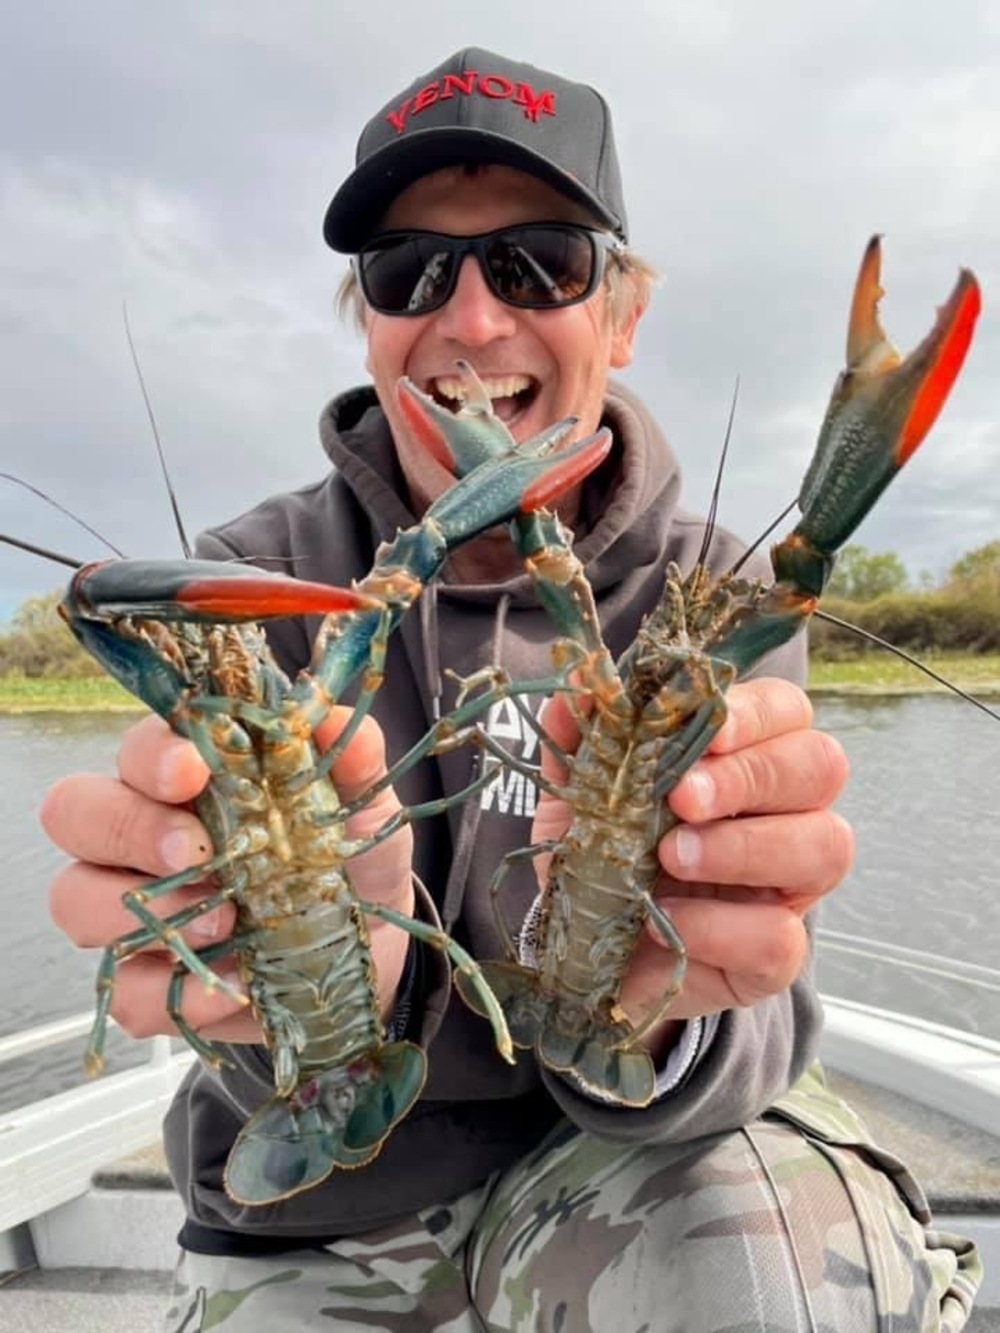 Catching CRABS and GIANT CRAWFISH with NETS and Traps for a Catch